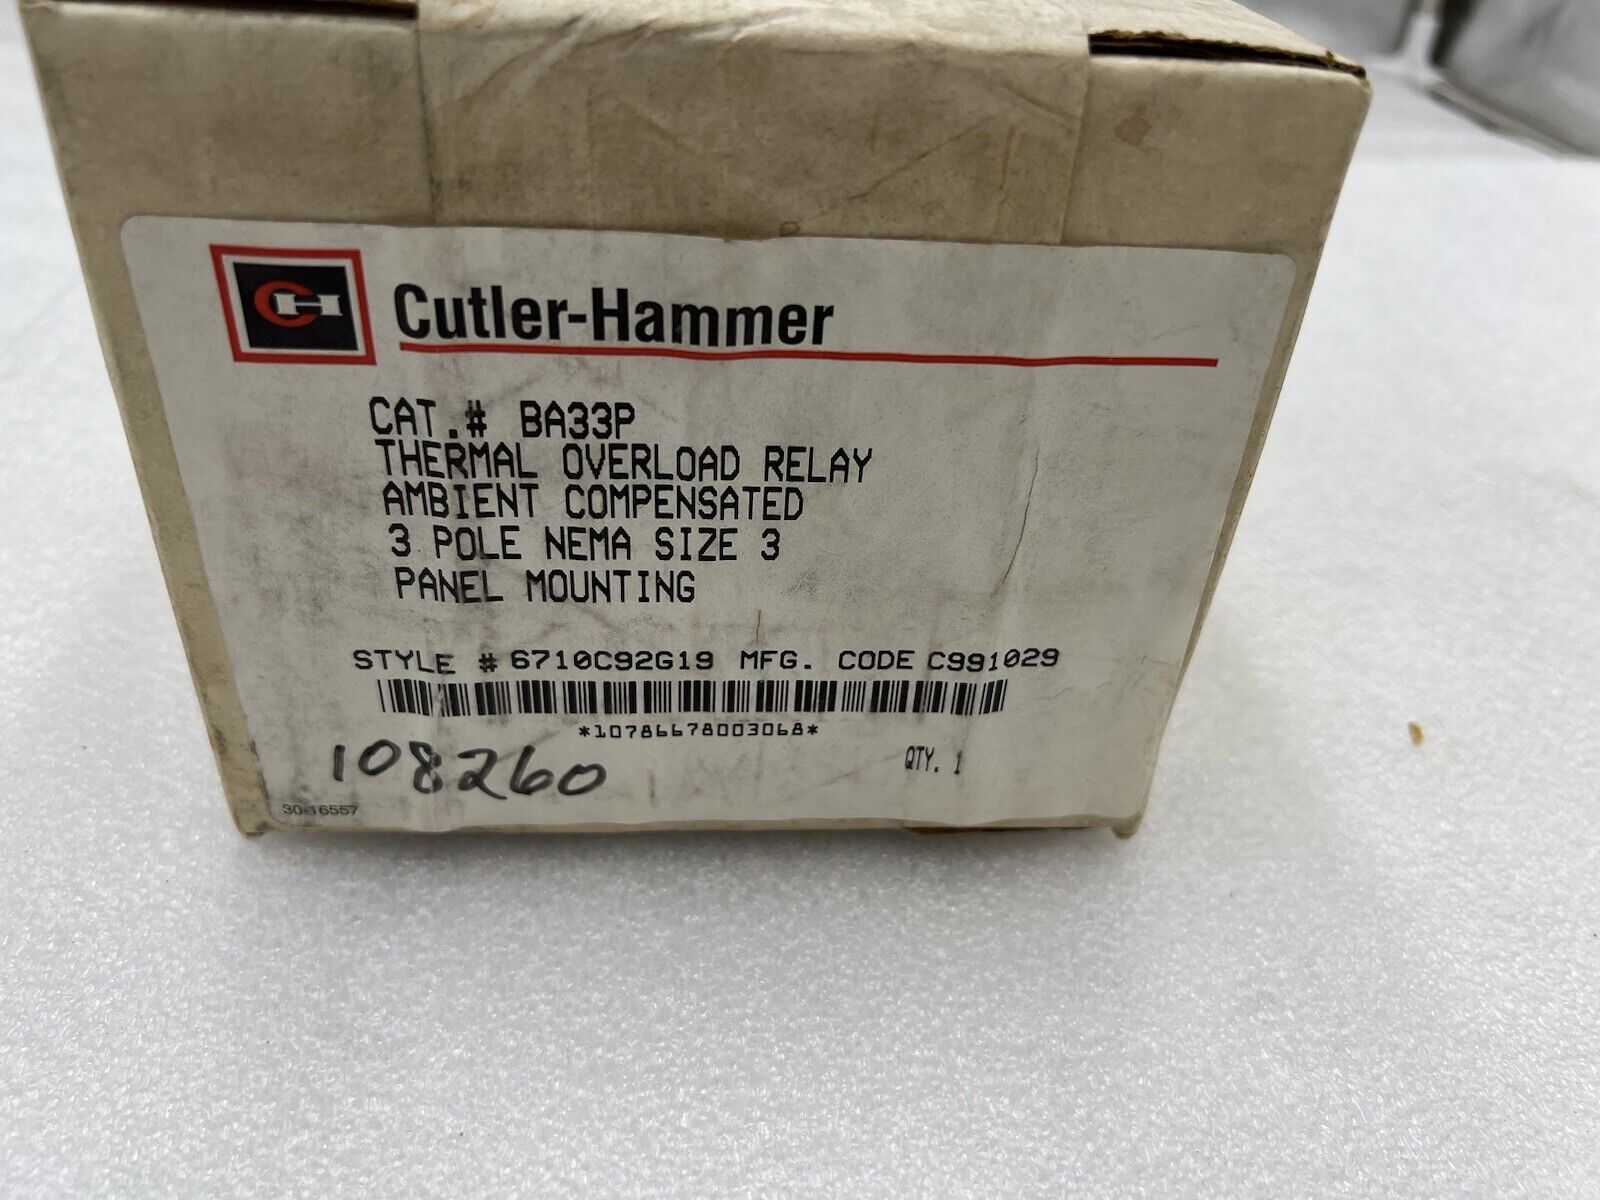 New Cutler Hammer Thermal Overload Relay BA33P #K-1967